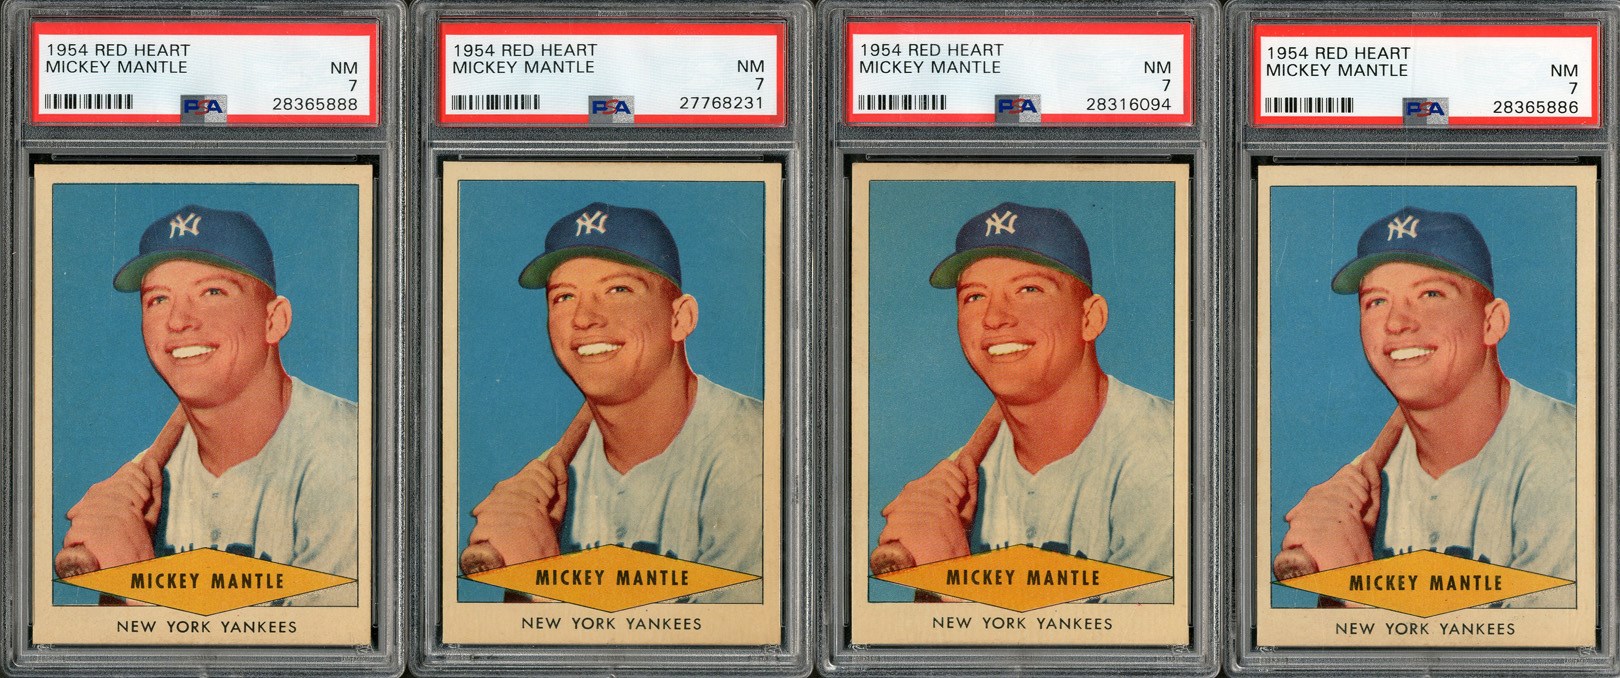 Baseball and Trading Cards - 1954 Red Heart Mickey Mantle Lot of FOUR PSA NM 7 cards